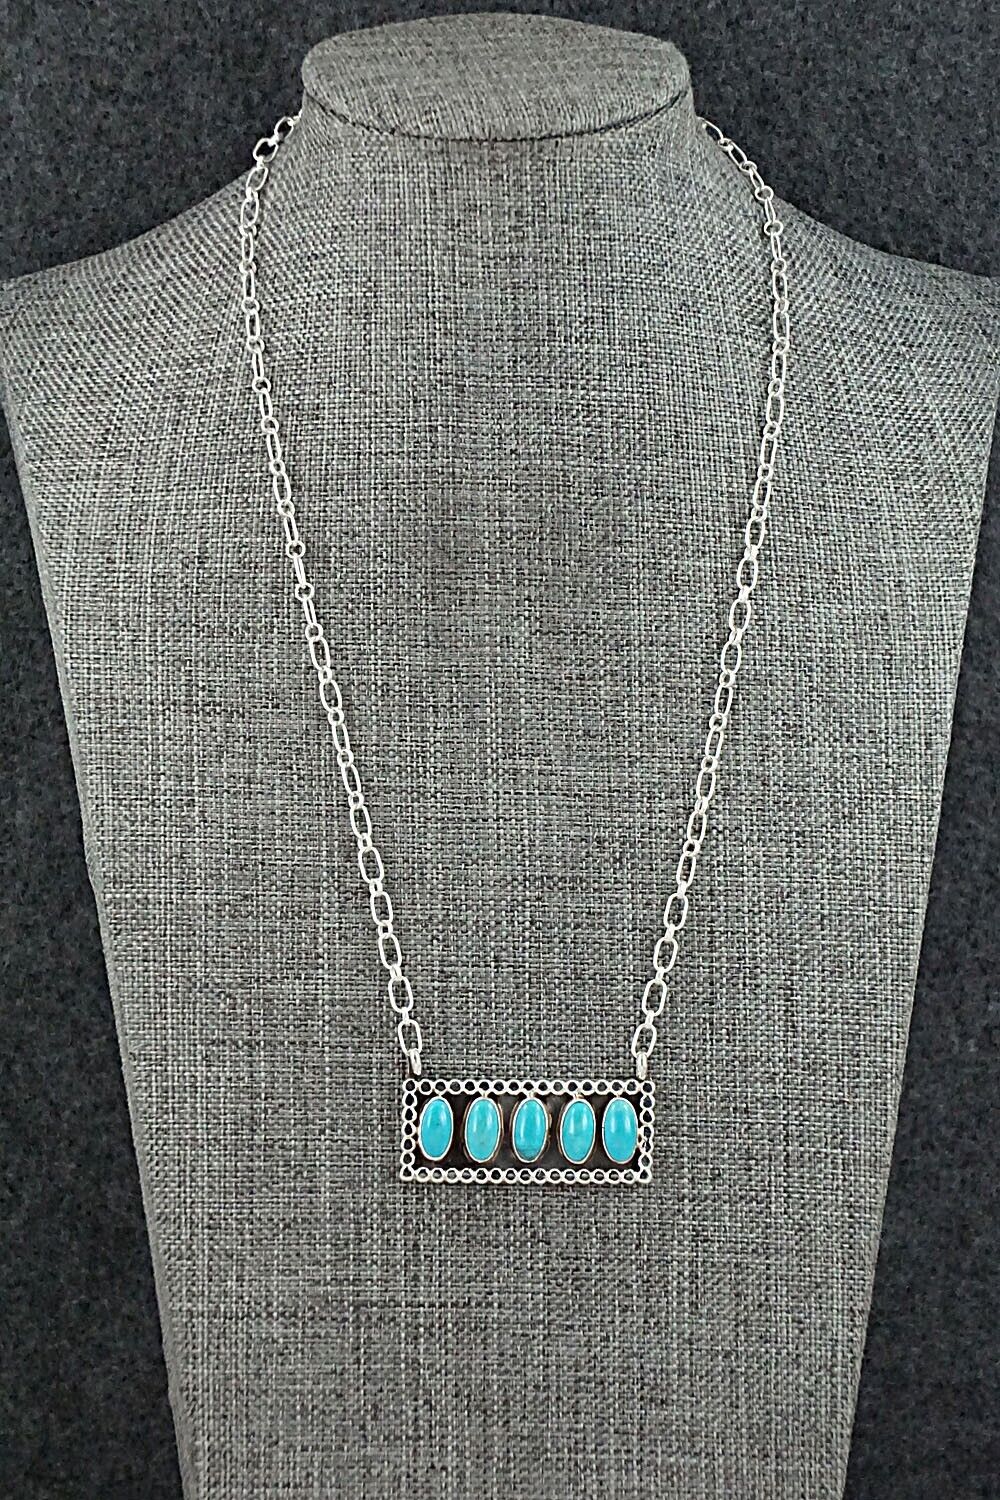 Turquoise & Sterling Silver Necklace - Sharon McCarthy